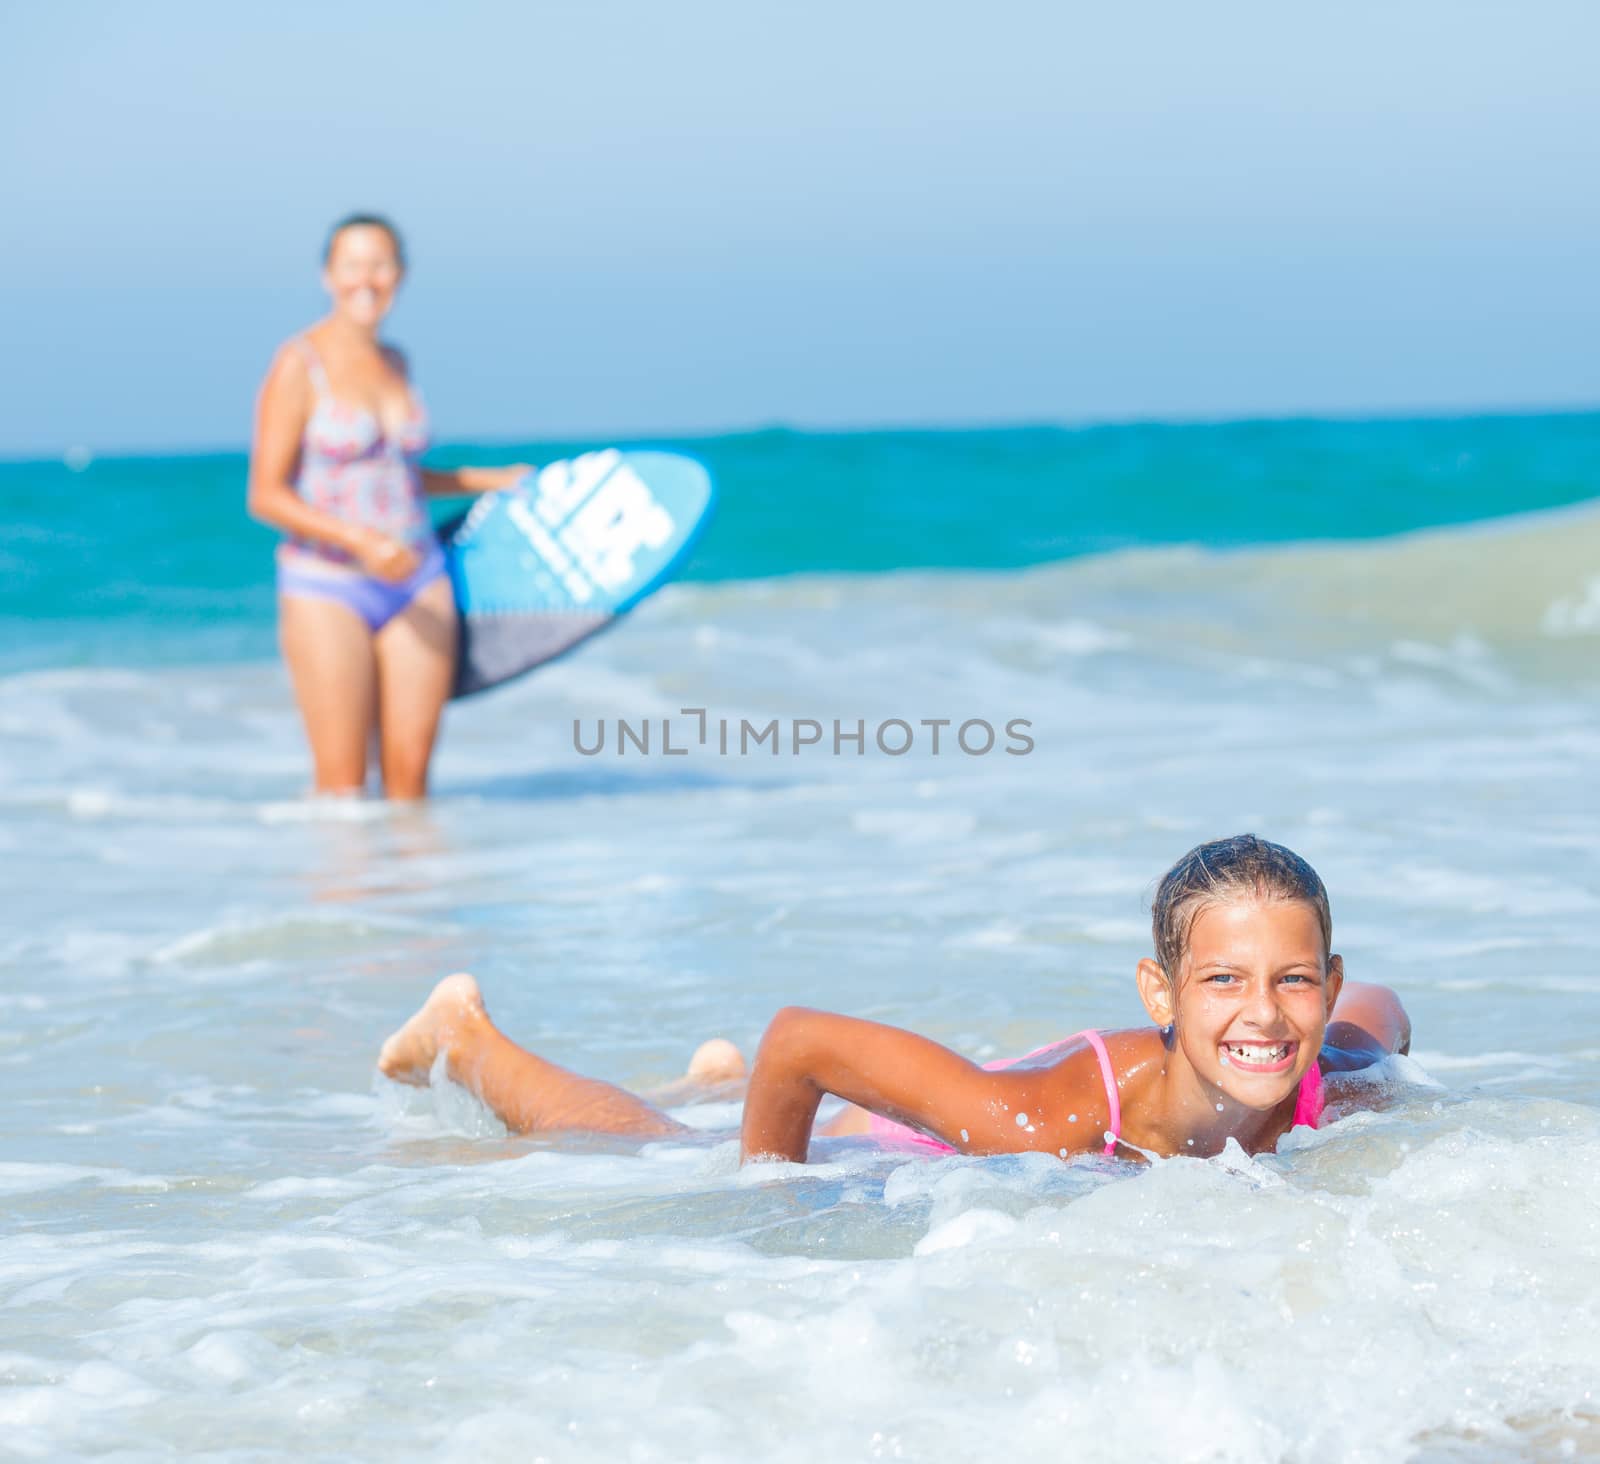 Summer vacation - Happy cute girl and her mother having fun with surfboard in the ocean